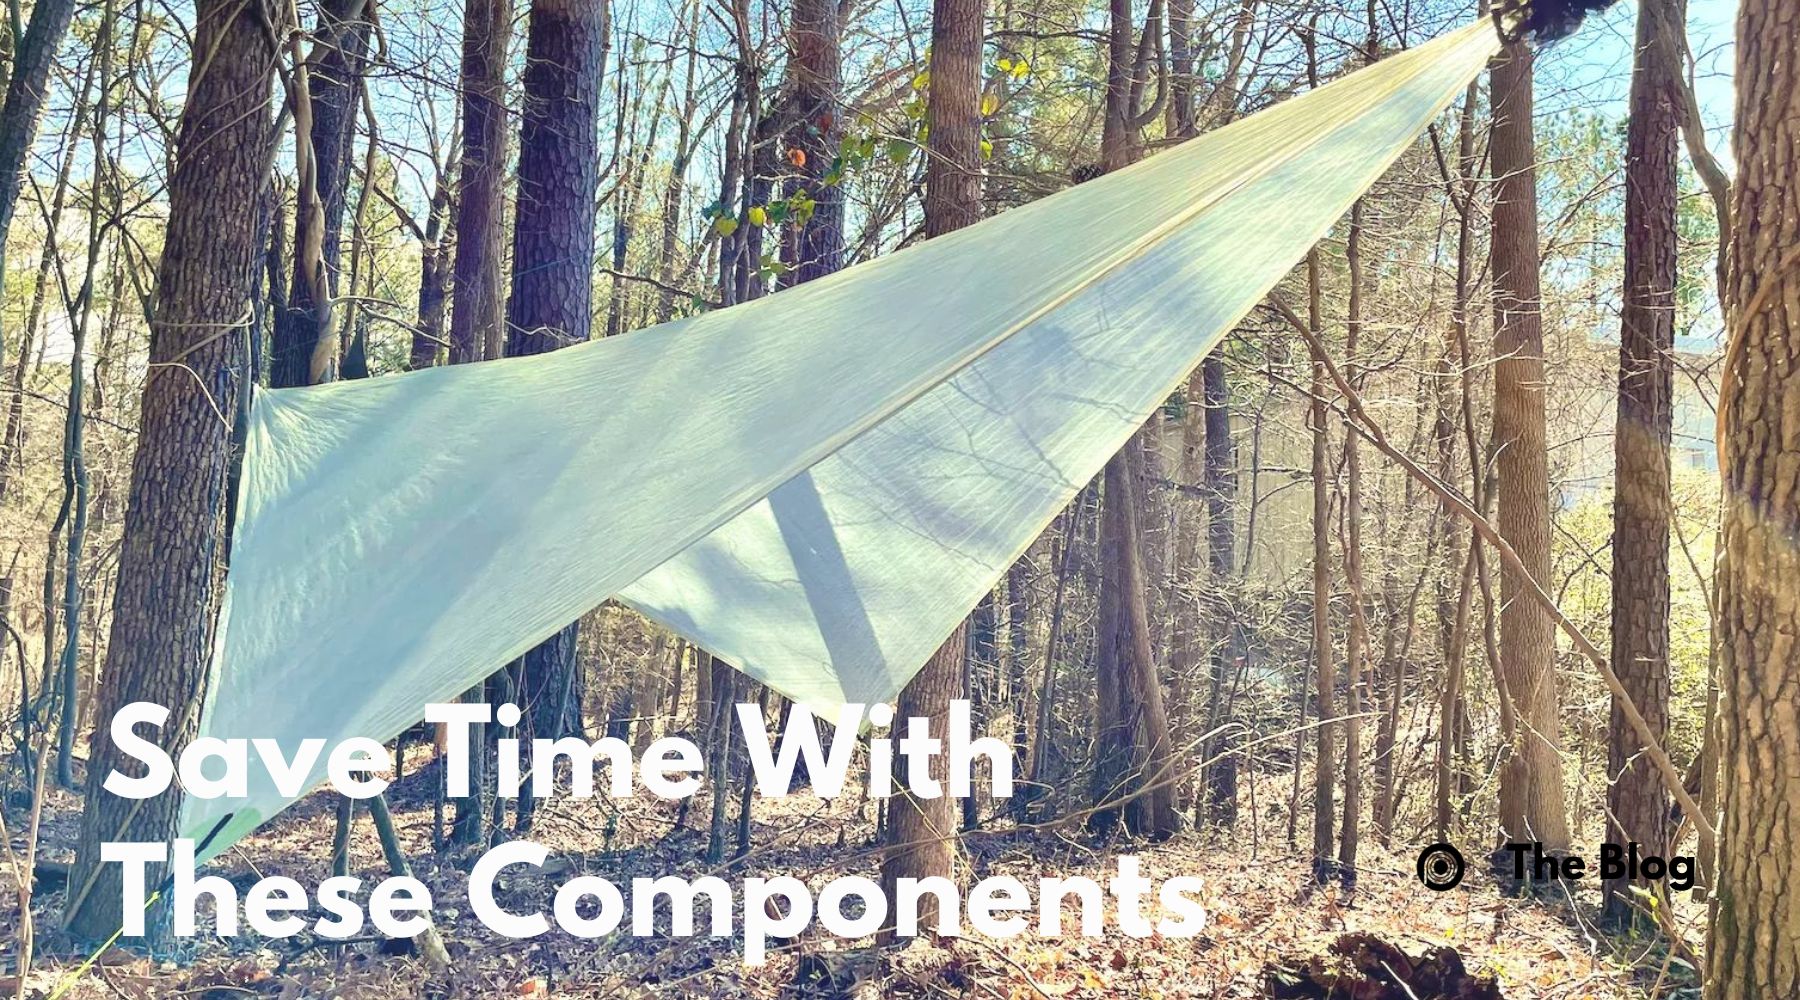 Save time with these components